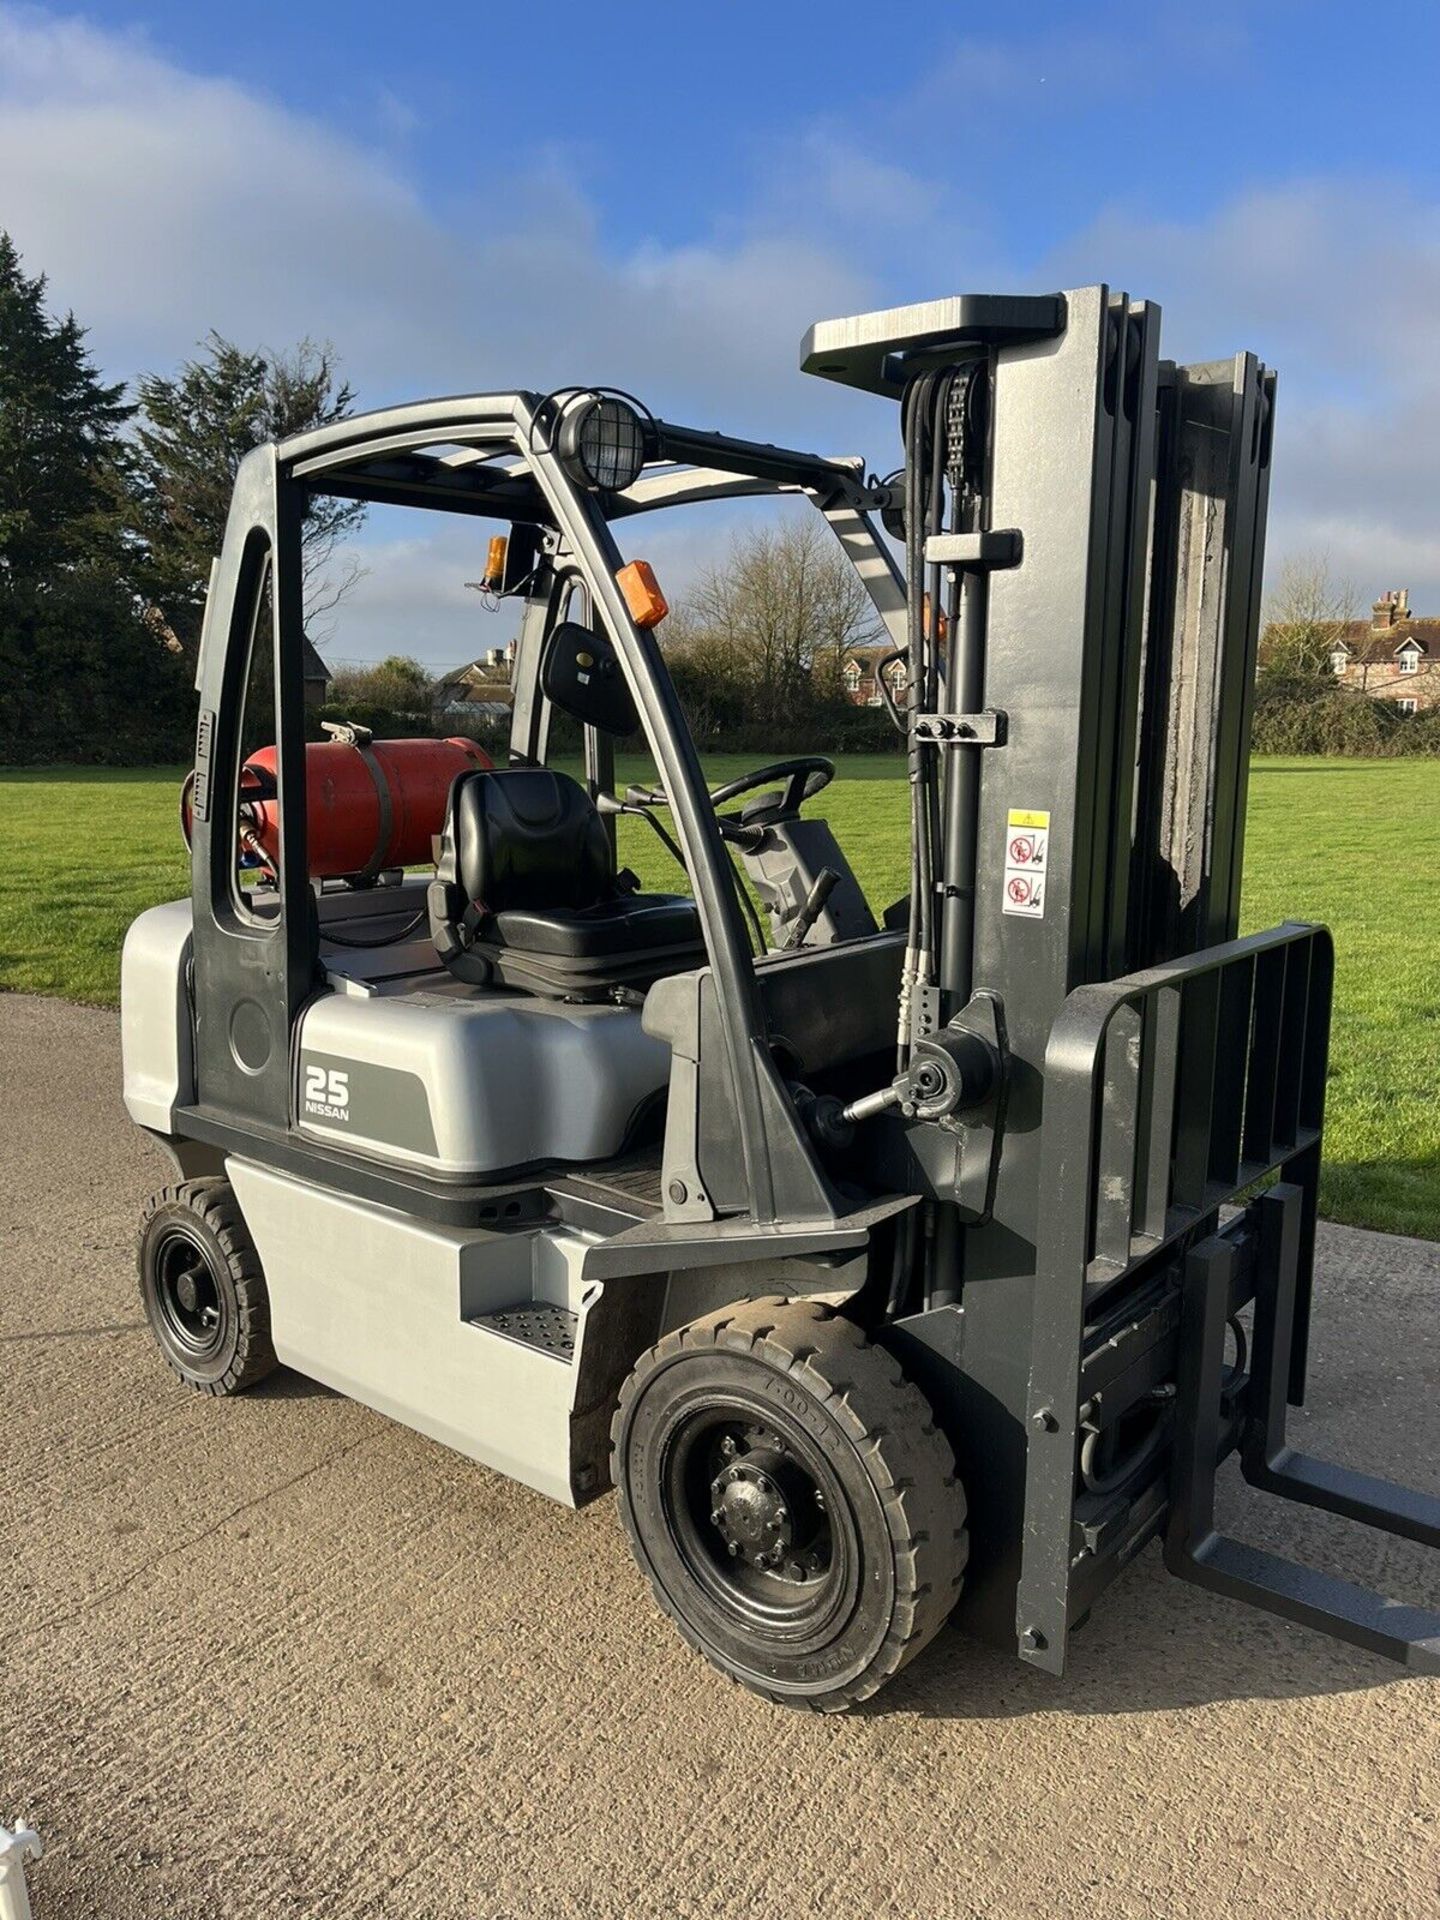 2015 - NISSAN 2.5 Gas Forklift Truck (Container Spec)